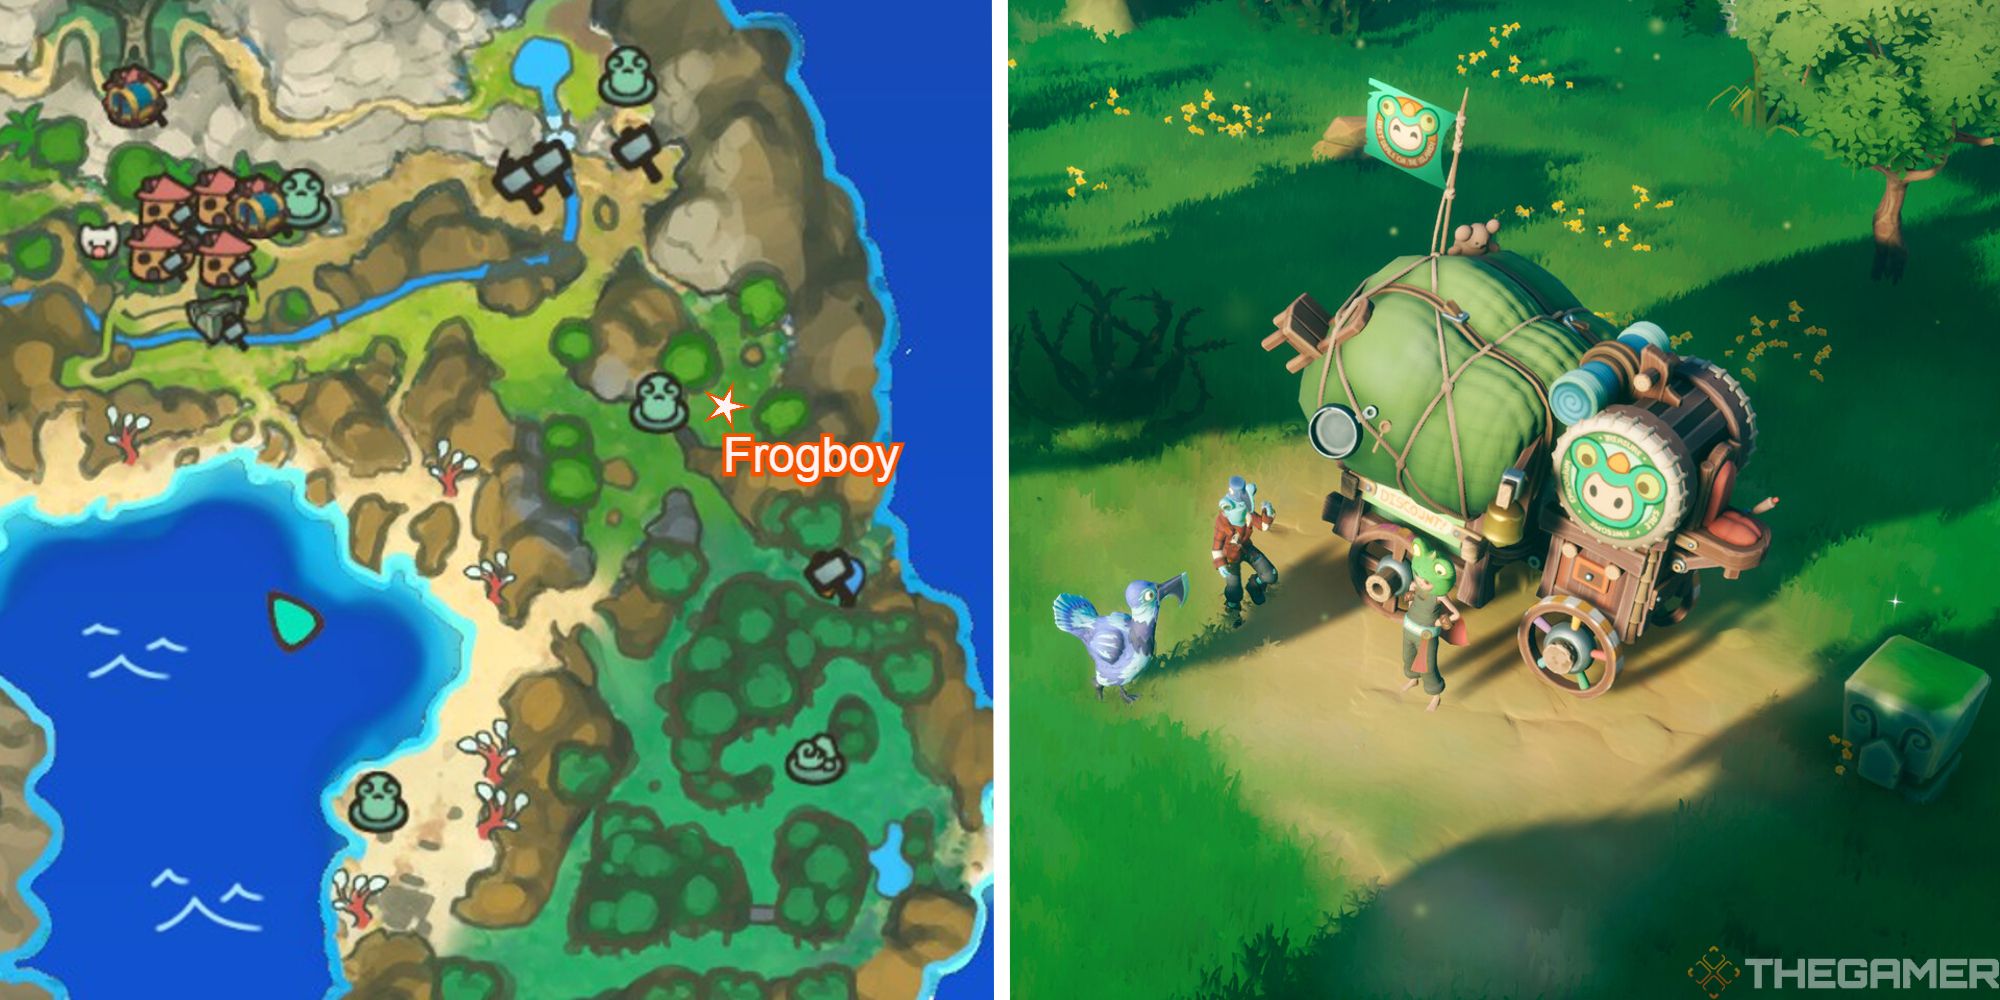 map with frogboy location next to image of frogboy cart